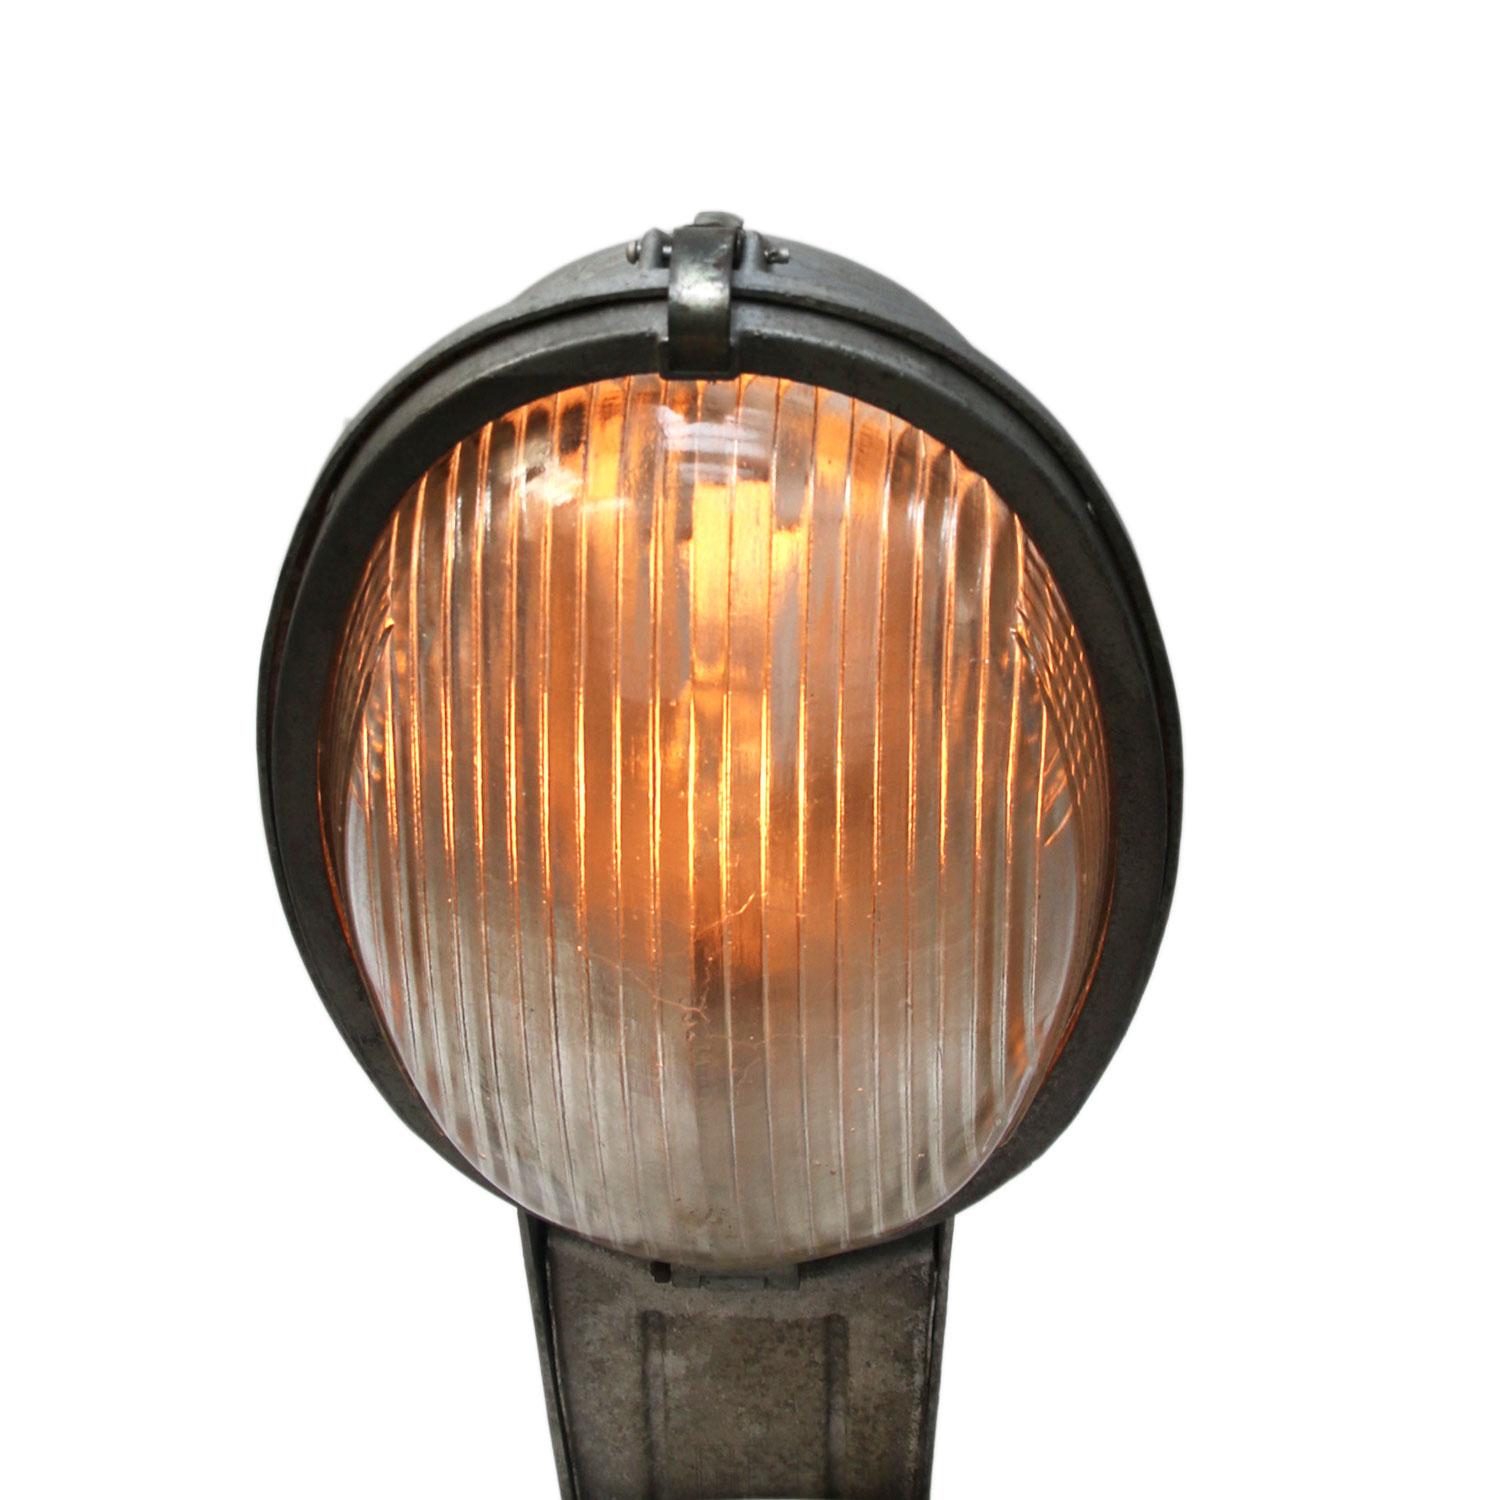 Industrial Street wall light.
Cast aluminium body with round Holophane glass.

Measure: Weight 7.4 kg / 16.3 lb

Priced per individual item. All lamps have been made suitable by international standards for incandescent light bulbs, energy-efficient